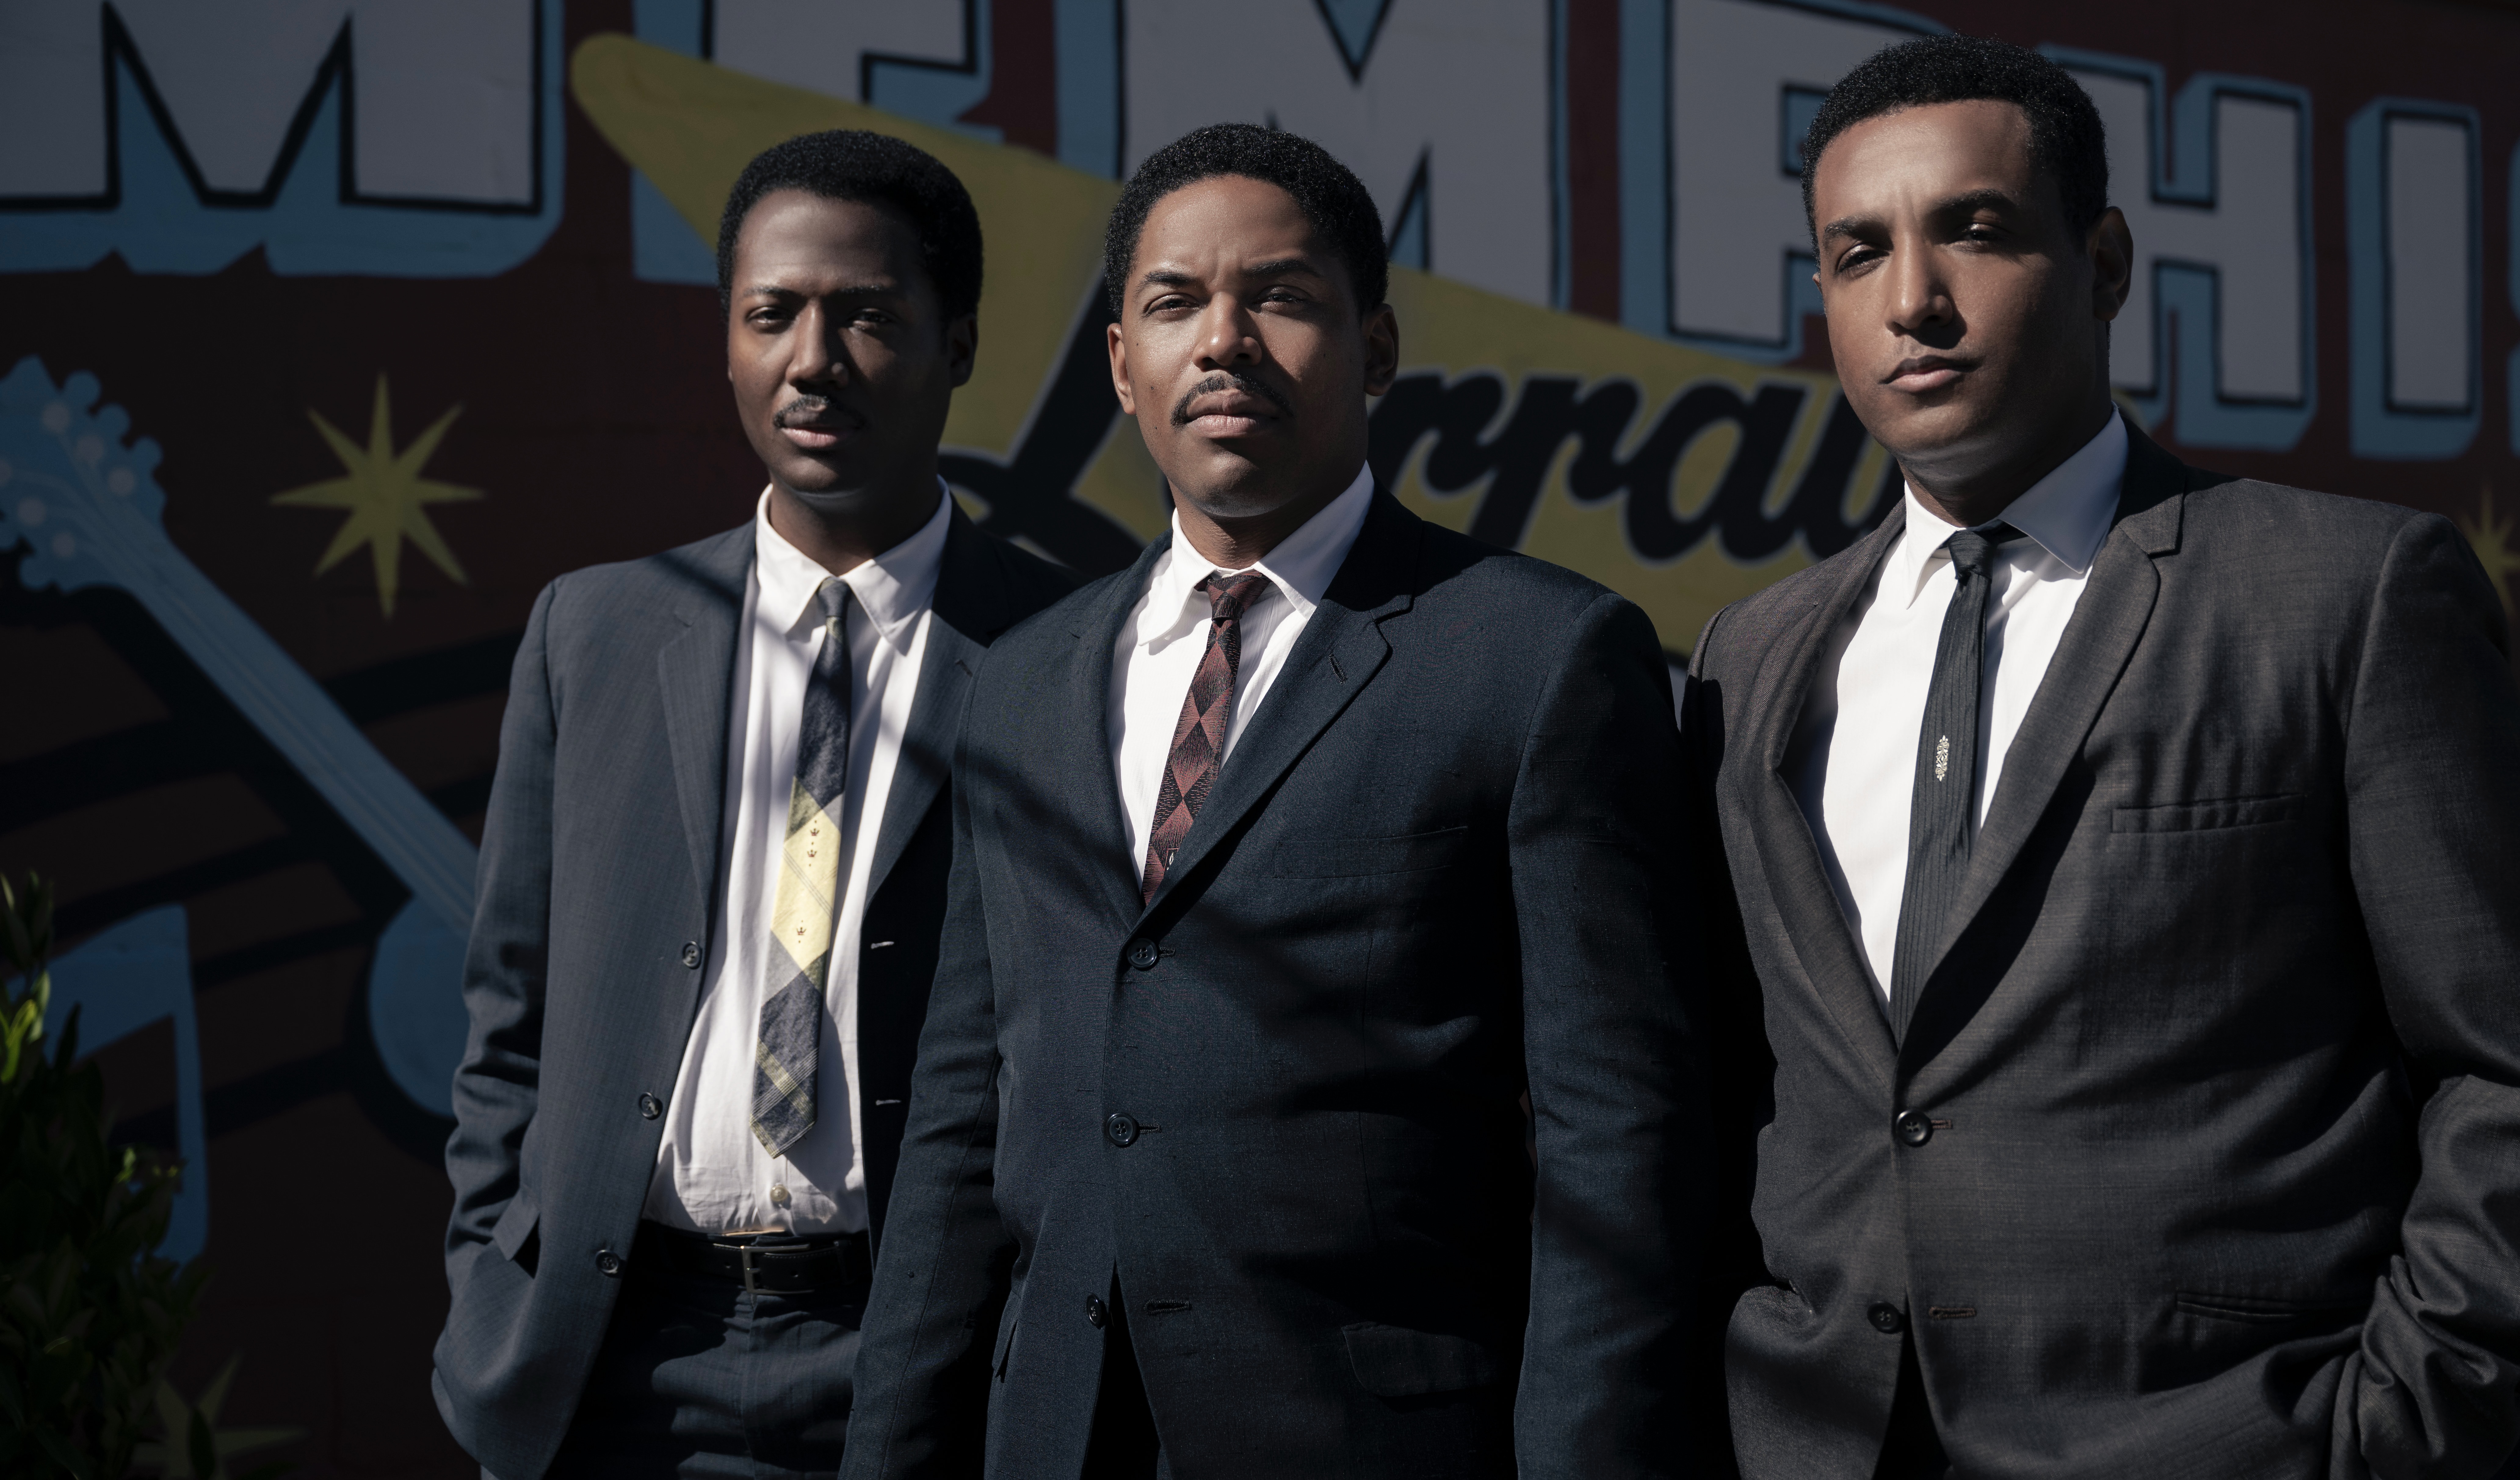 Left to right: Hubert Point-Du Jour as Ralph Abernathy, Kelvin Harrison Jr. as Martin Luther King Jr., and Anwar Ali as Andrew Young in "Genius: MLK/X." Photo credit: Richard DuCree, National Geographic